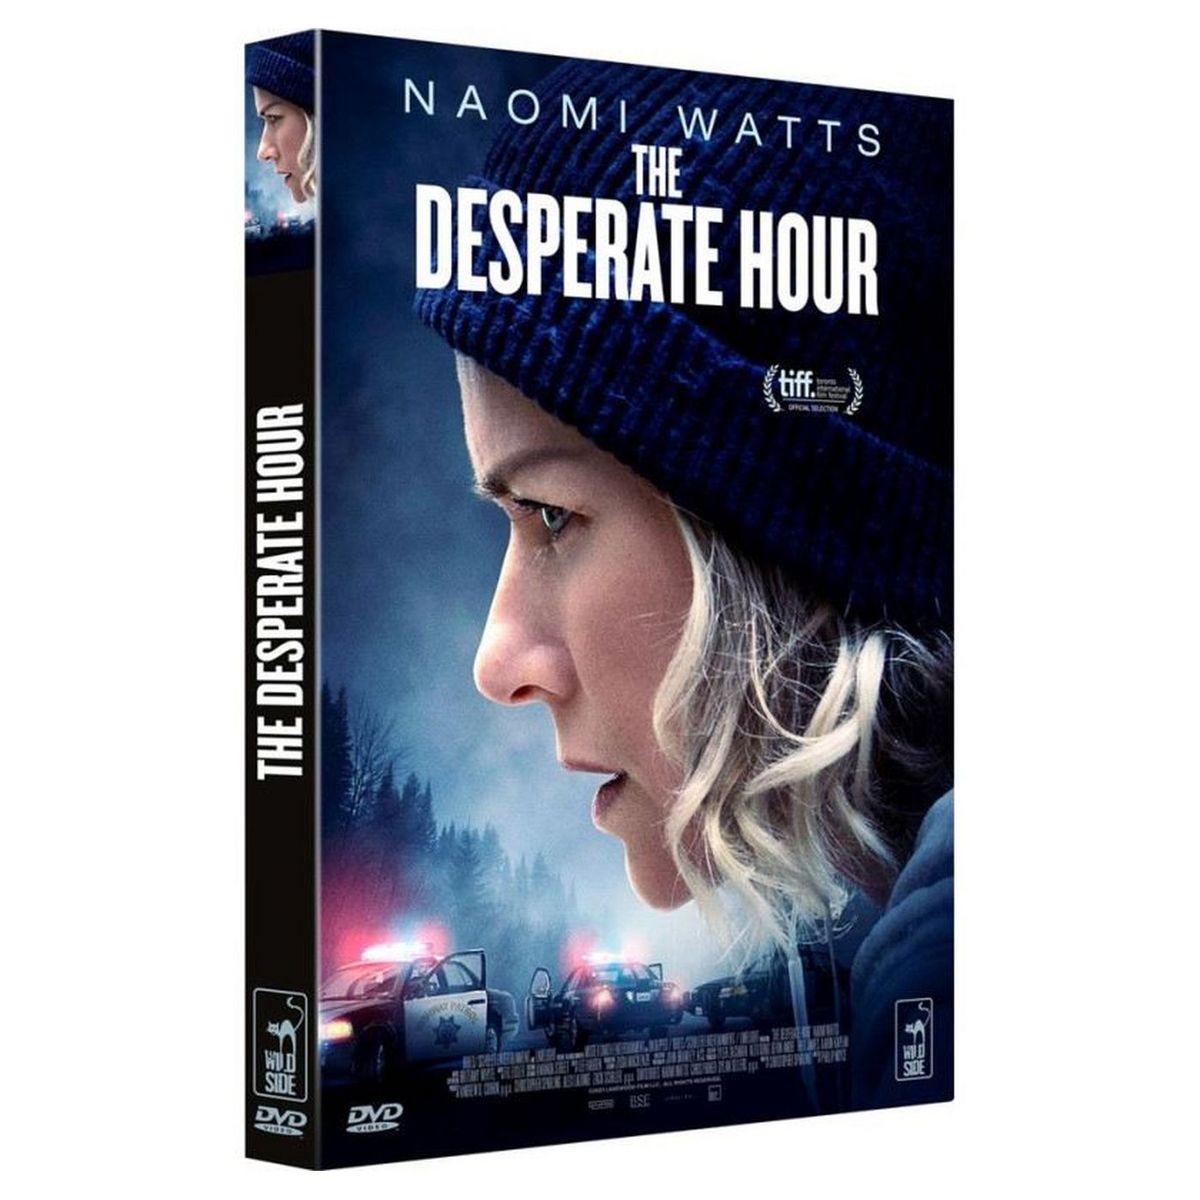 The Desperate Hour DVD